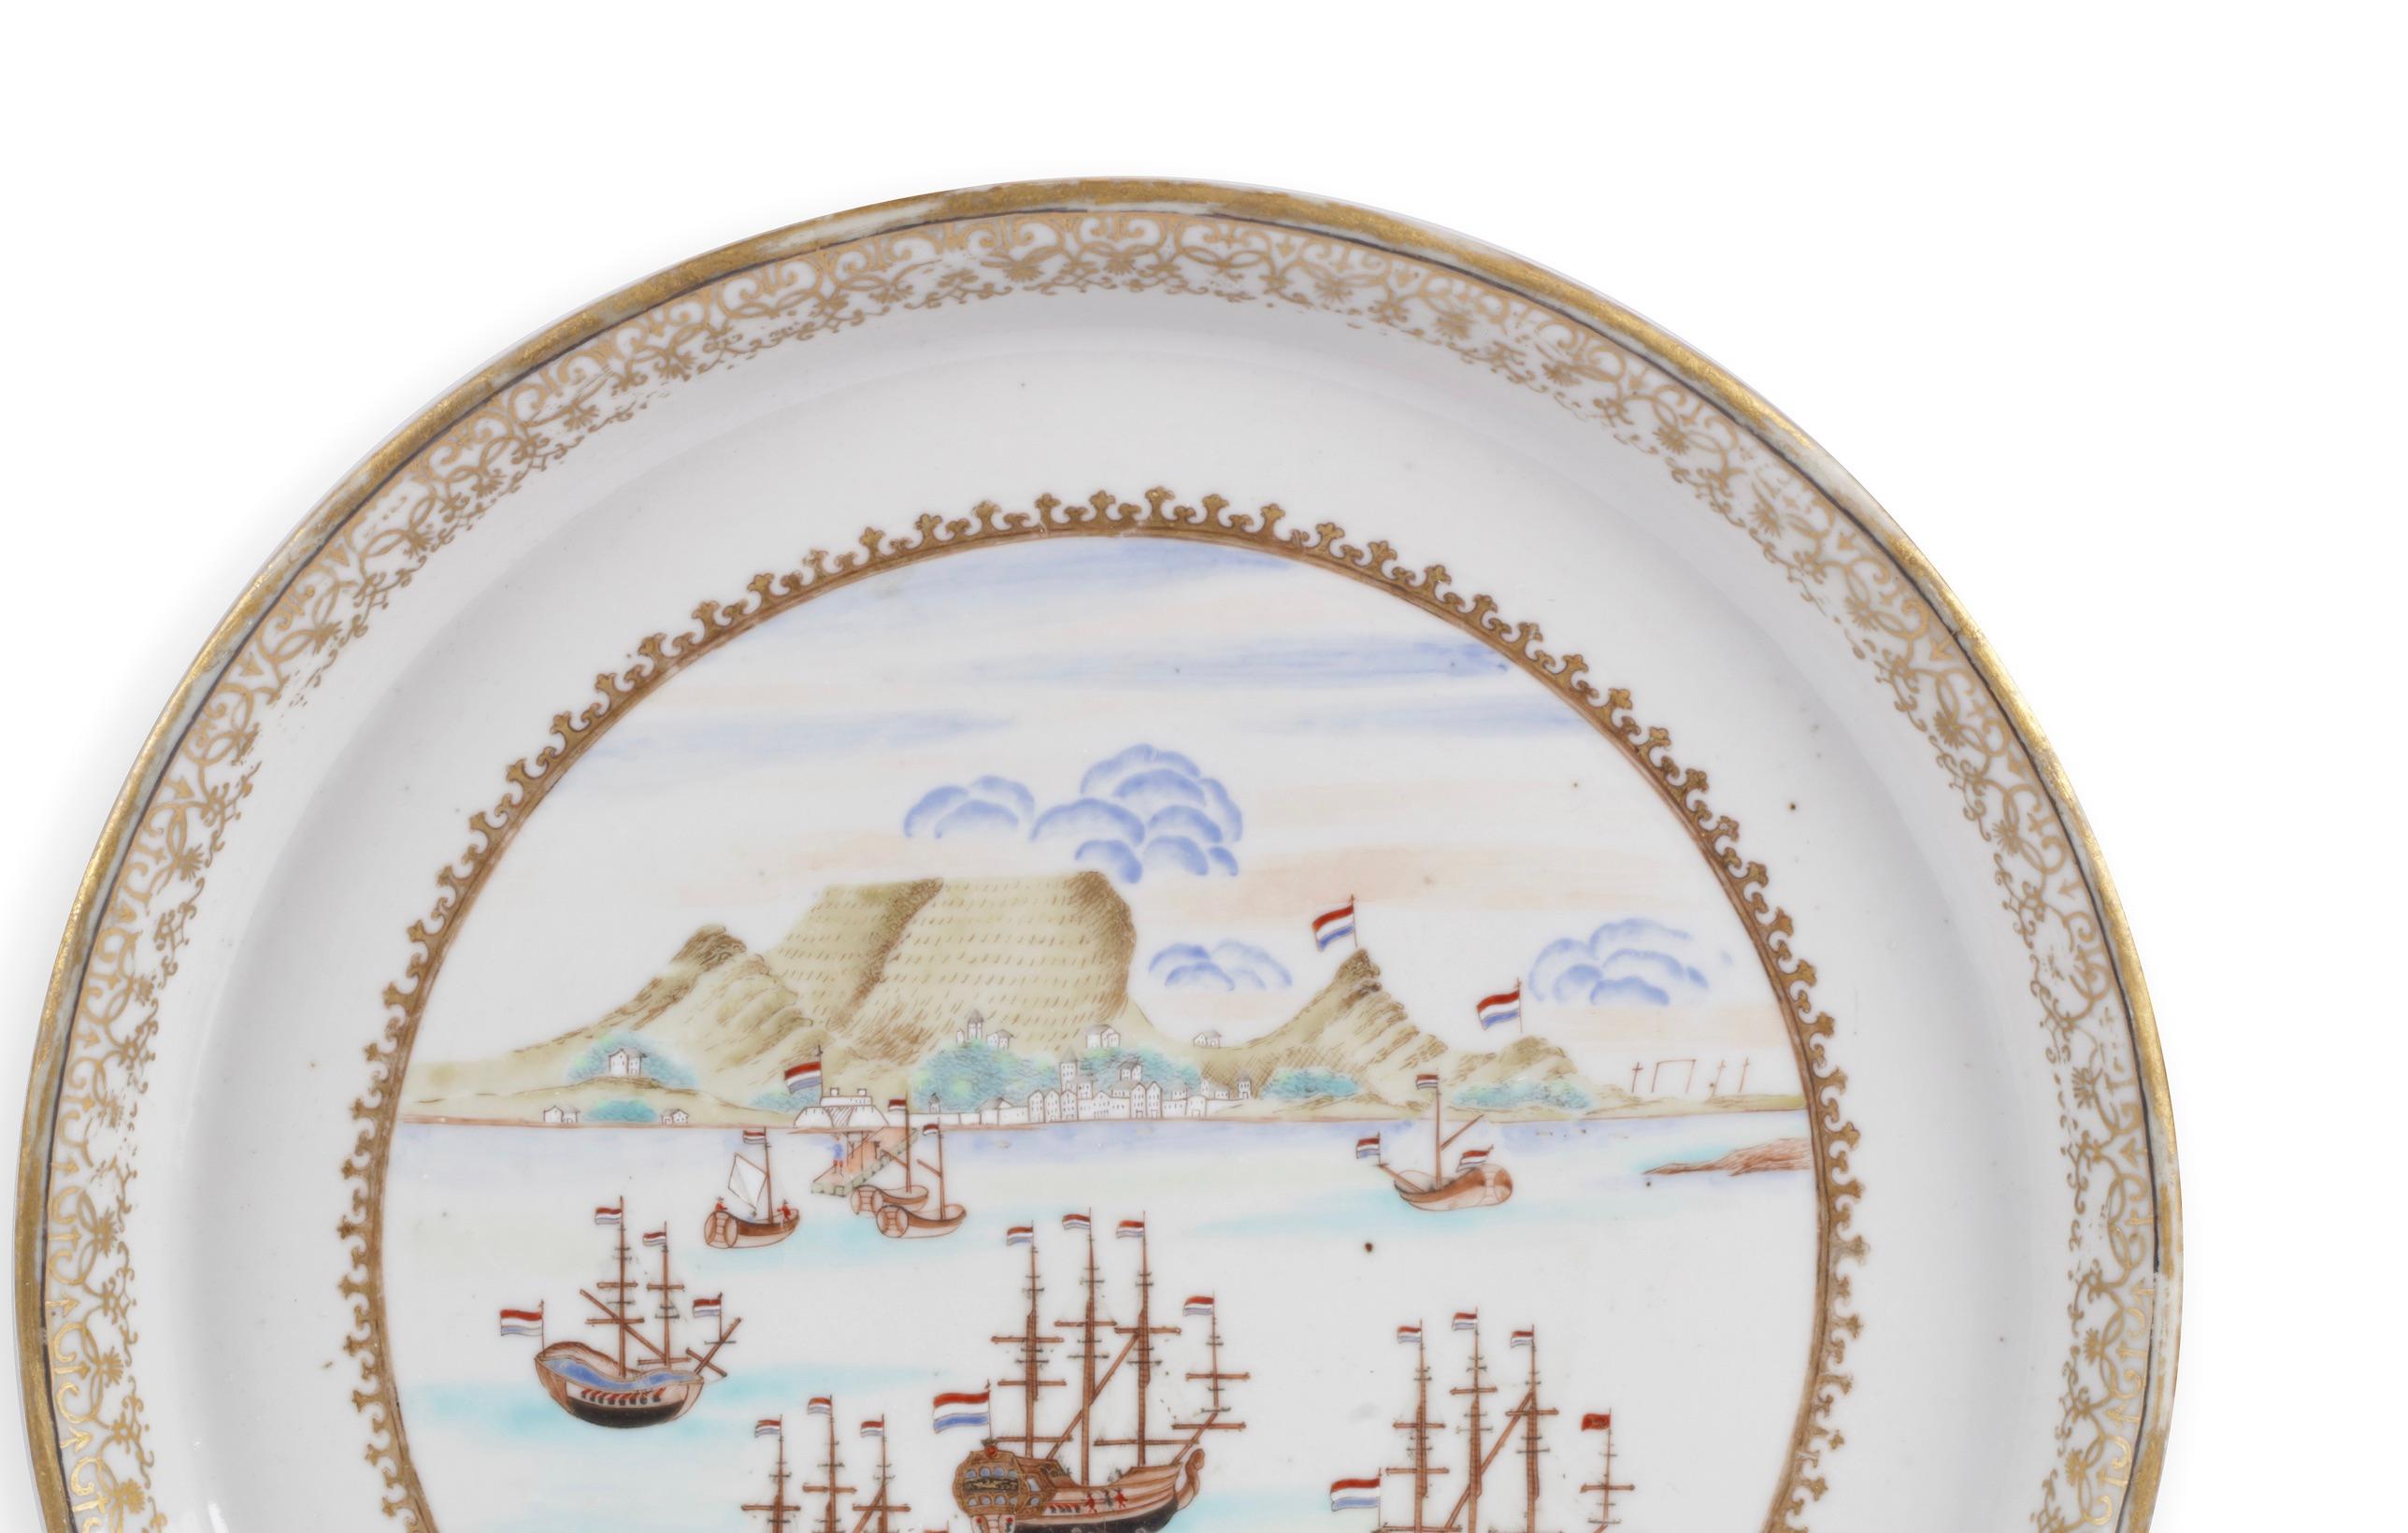 A rare large Chinese export porcelain 'Table Bay' dish

Qianlong period, circa 1735-1750

Diam. 27.5 cm

This version of the ‘Table Bay’ porcelain documented is decorated in polychrome enamels and gold and with a rim decorated with a